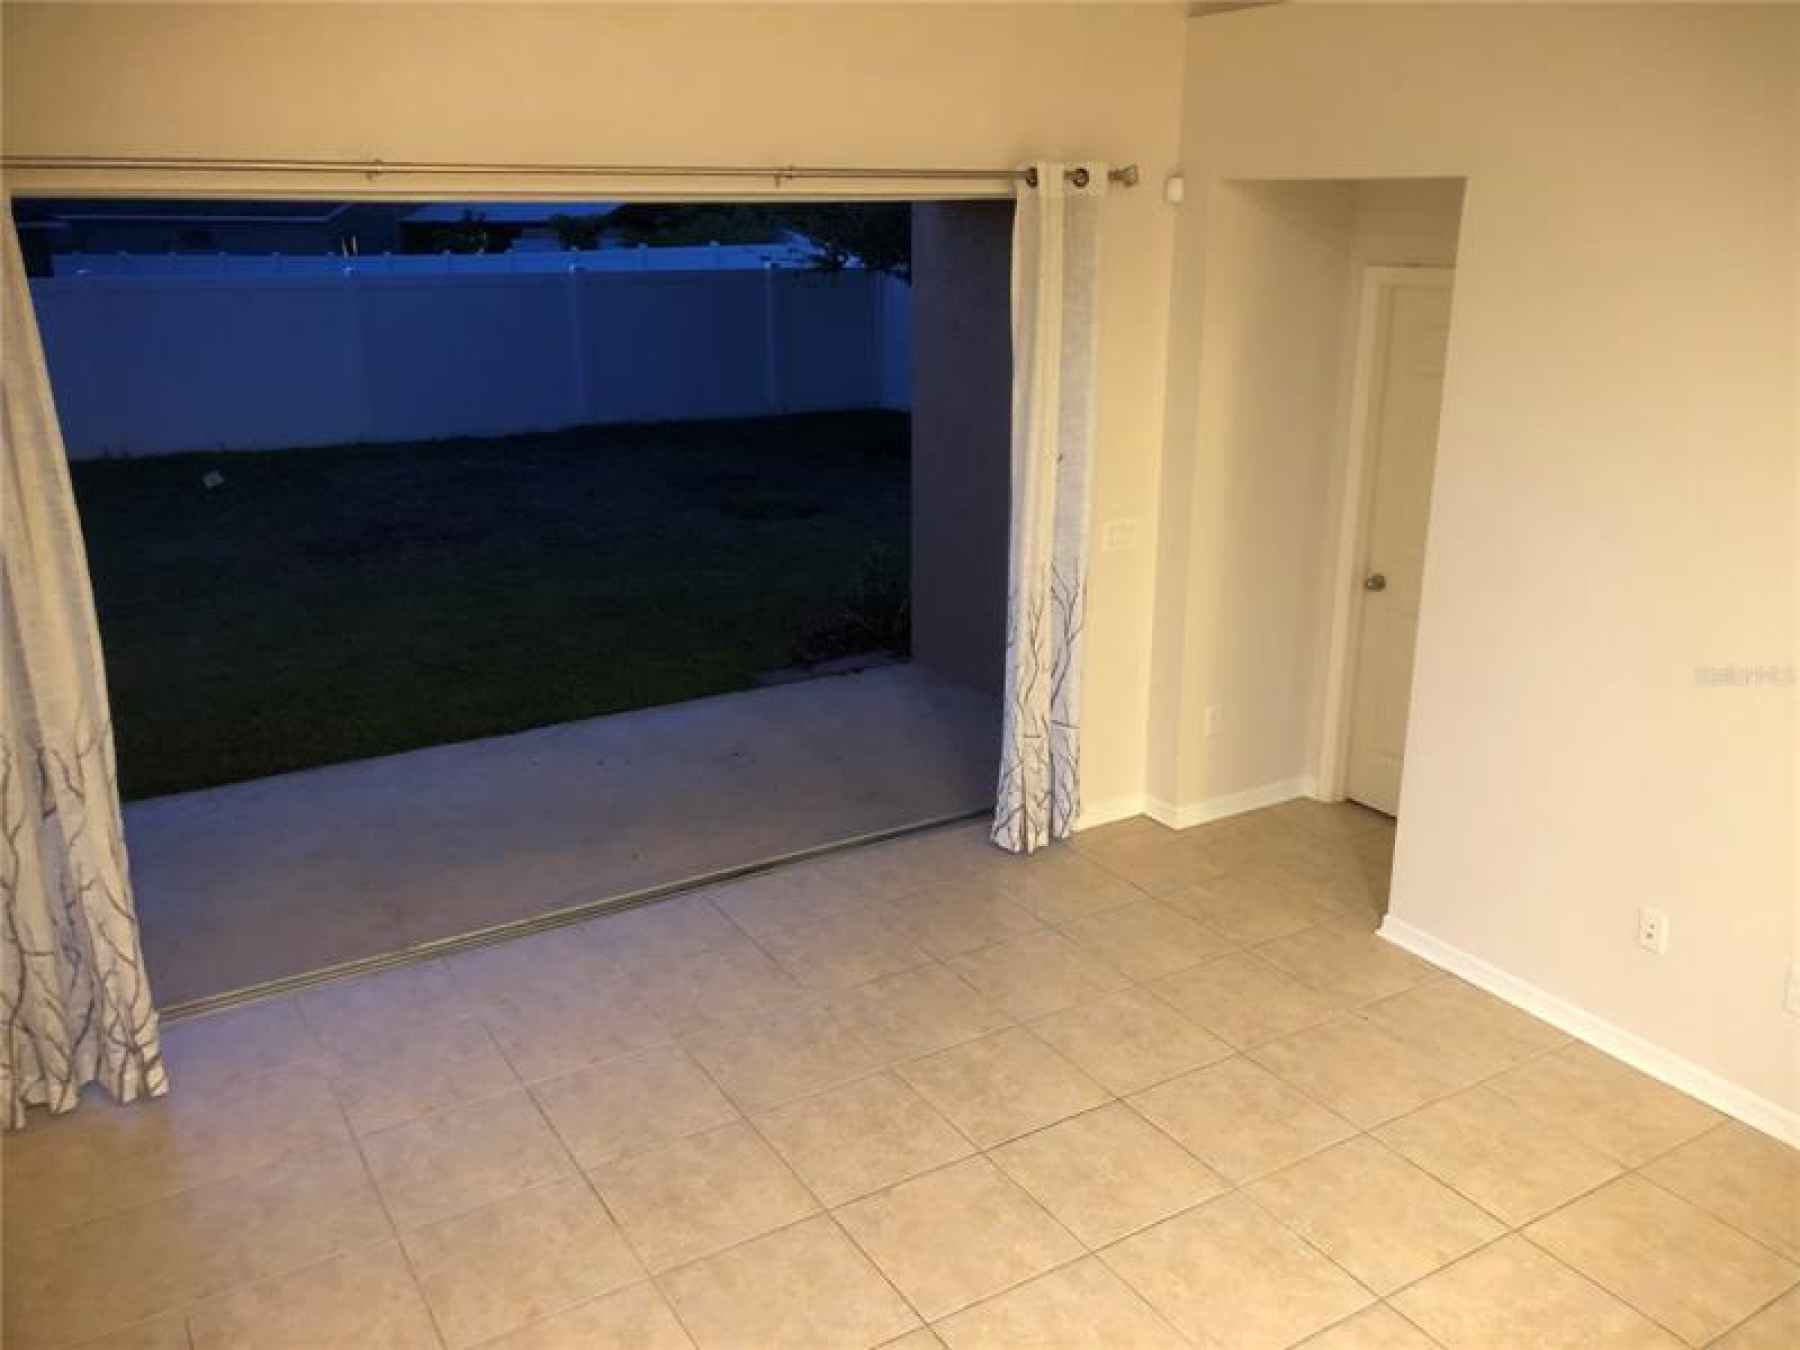 Pocket Sliding doors, go completely out of site.